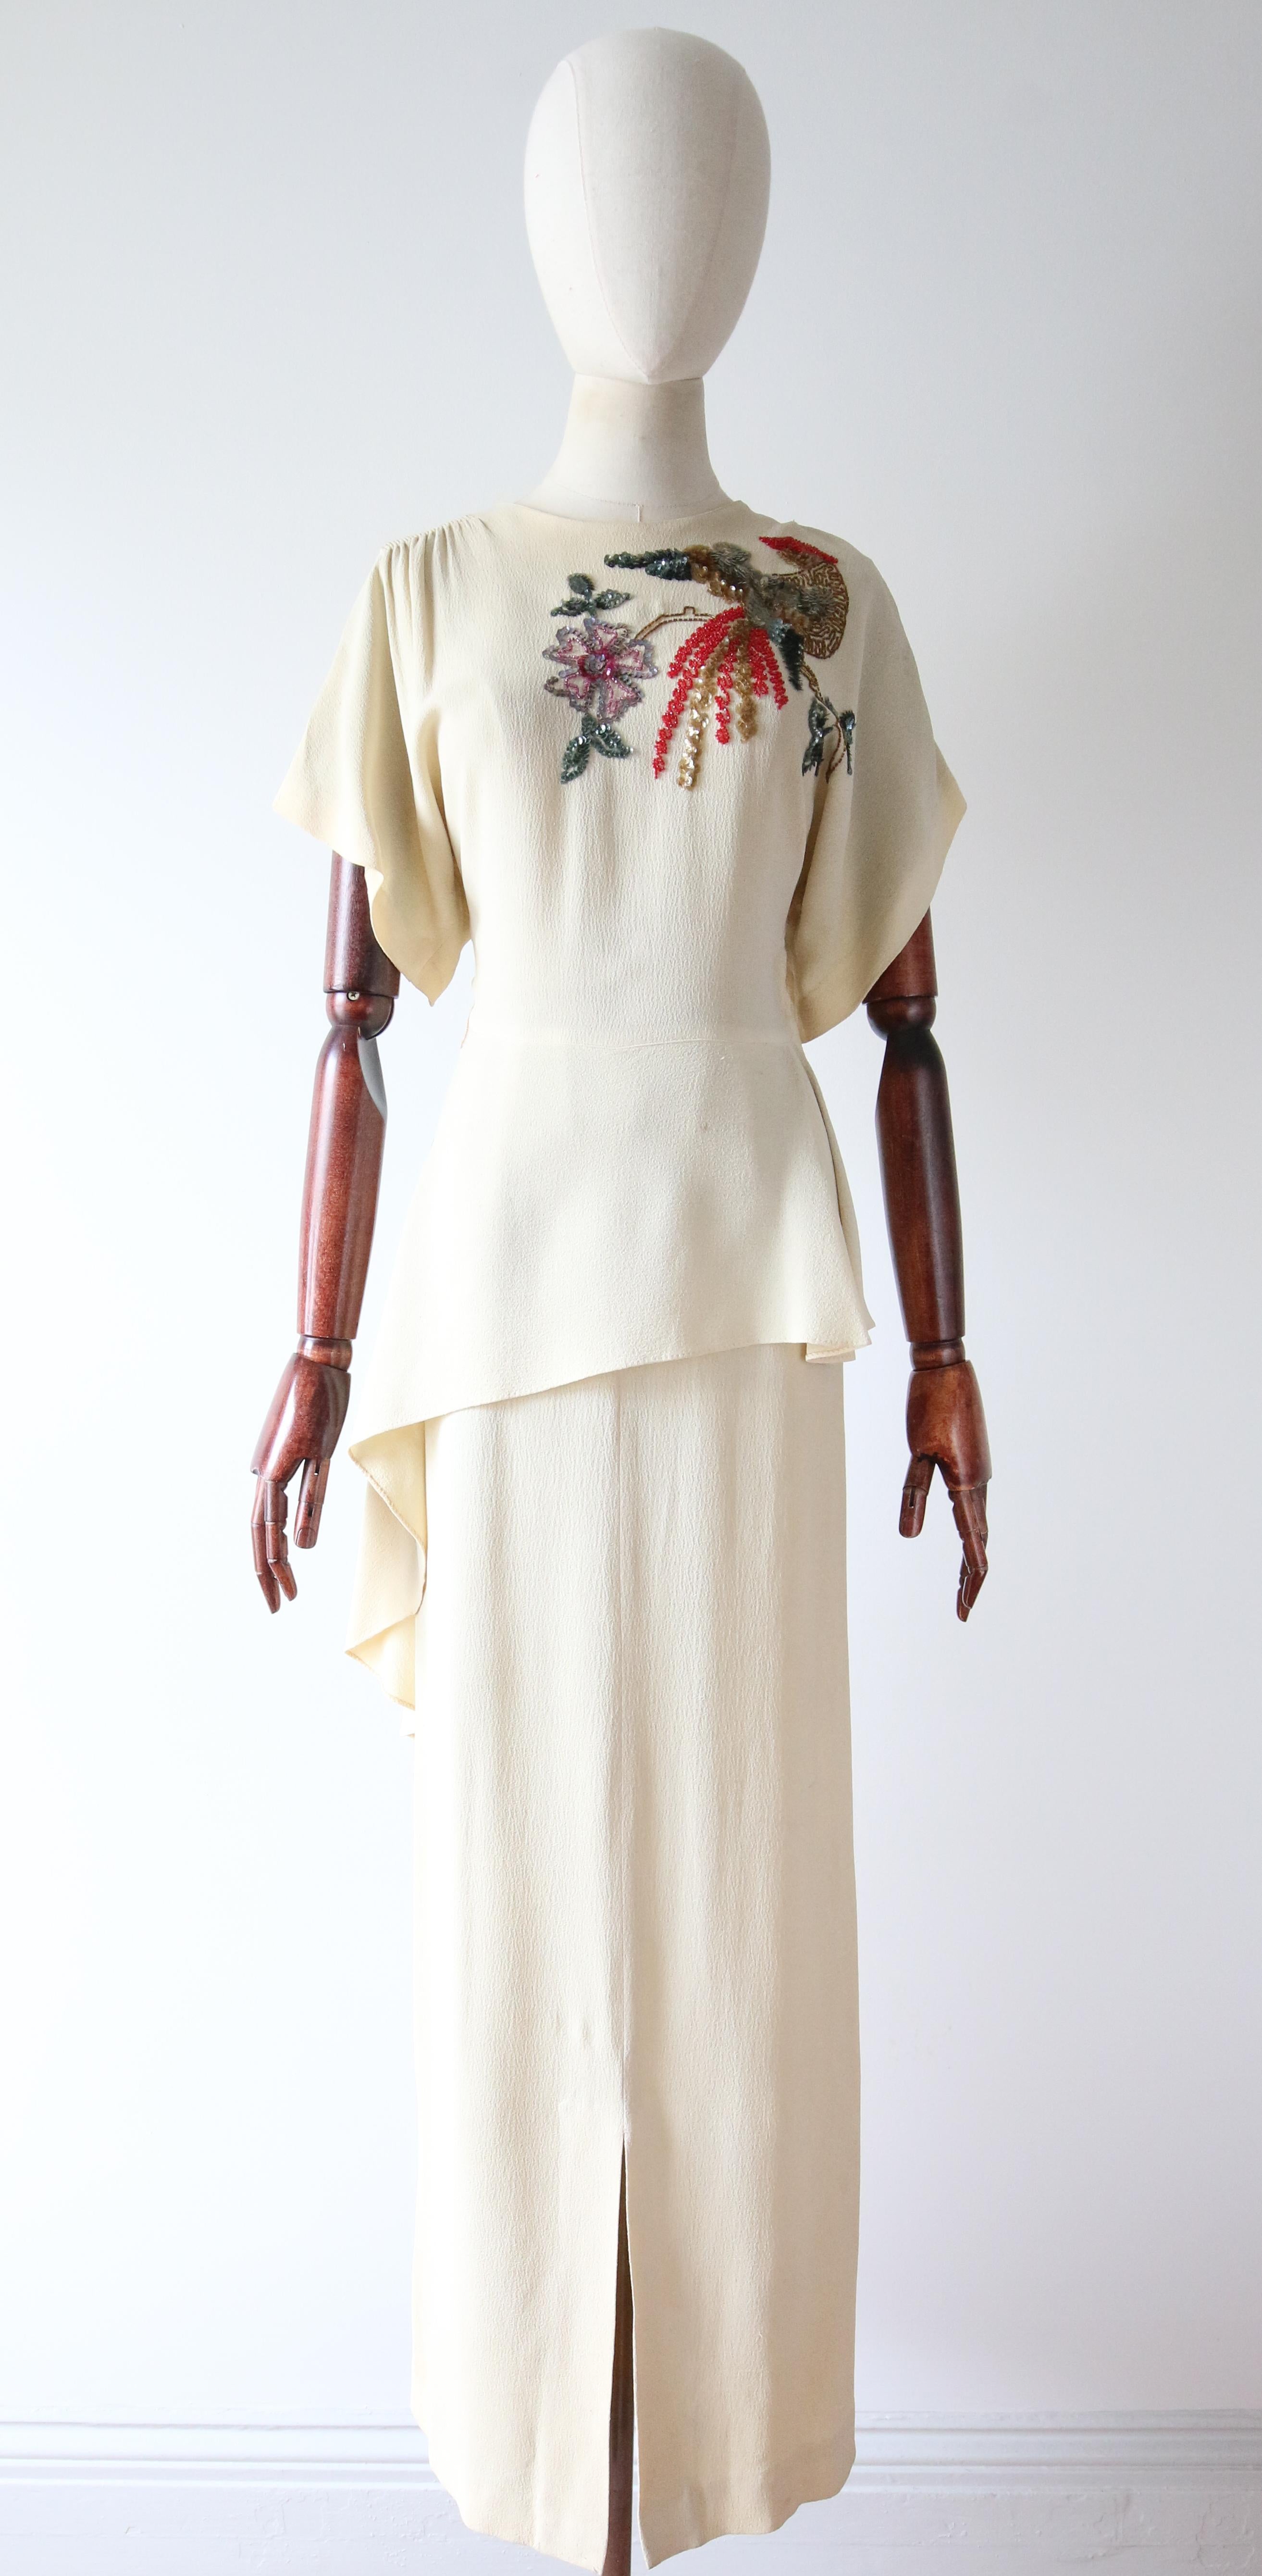 This truly enchanting 1940's cream crepe silk dress, embellished with a sequin and bead design of a bird of Paradise perched upon a branch surrounded by leaves and flowers, in sumptuous shades of gold, red, green and lilacs, is the perfect show